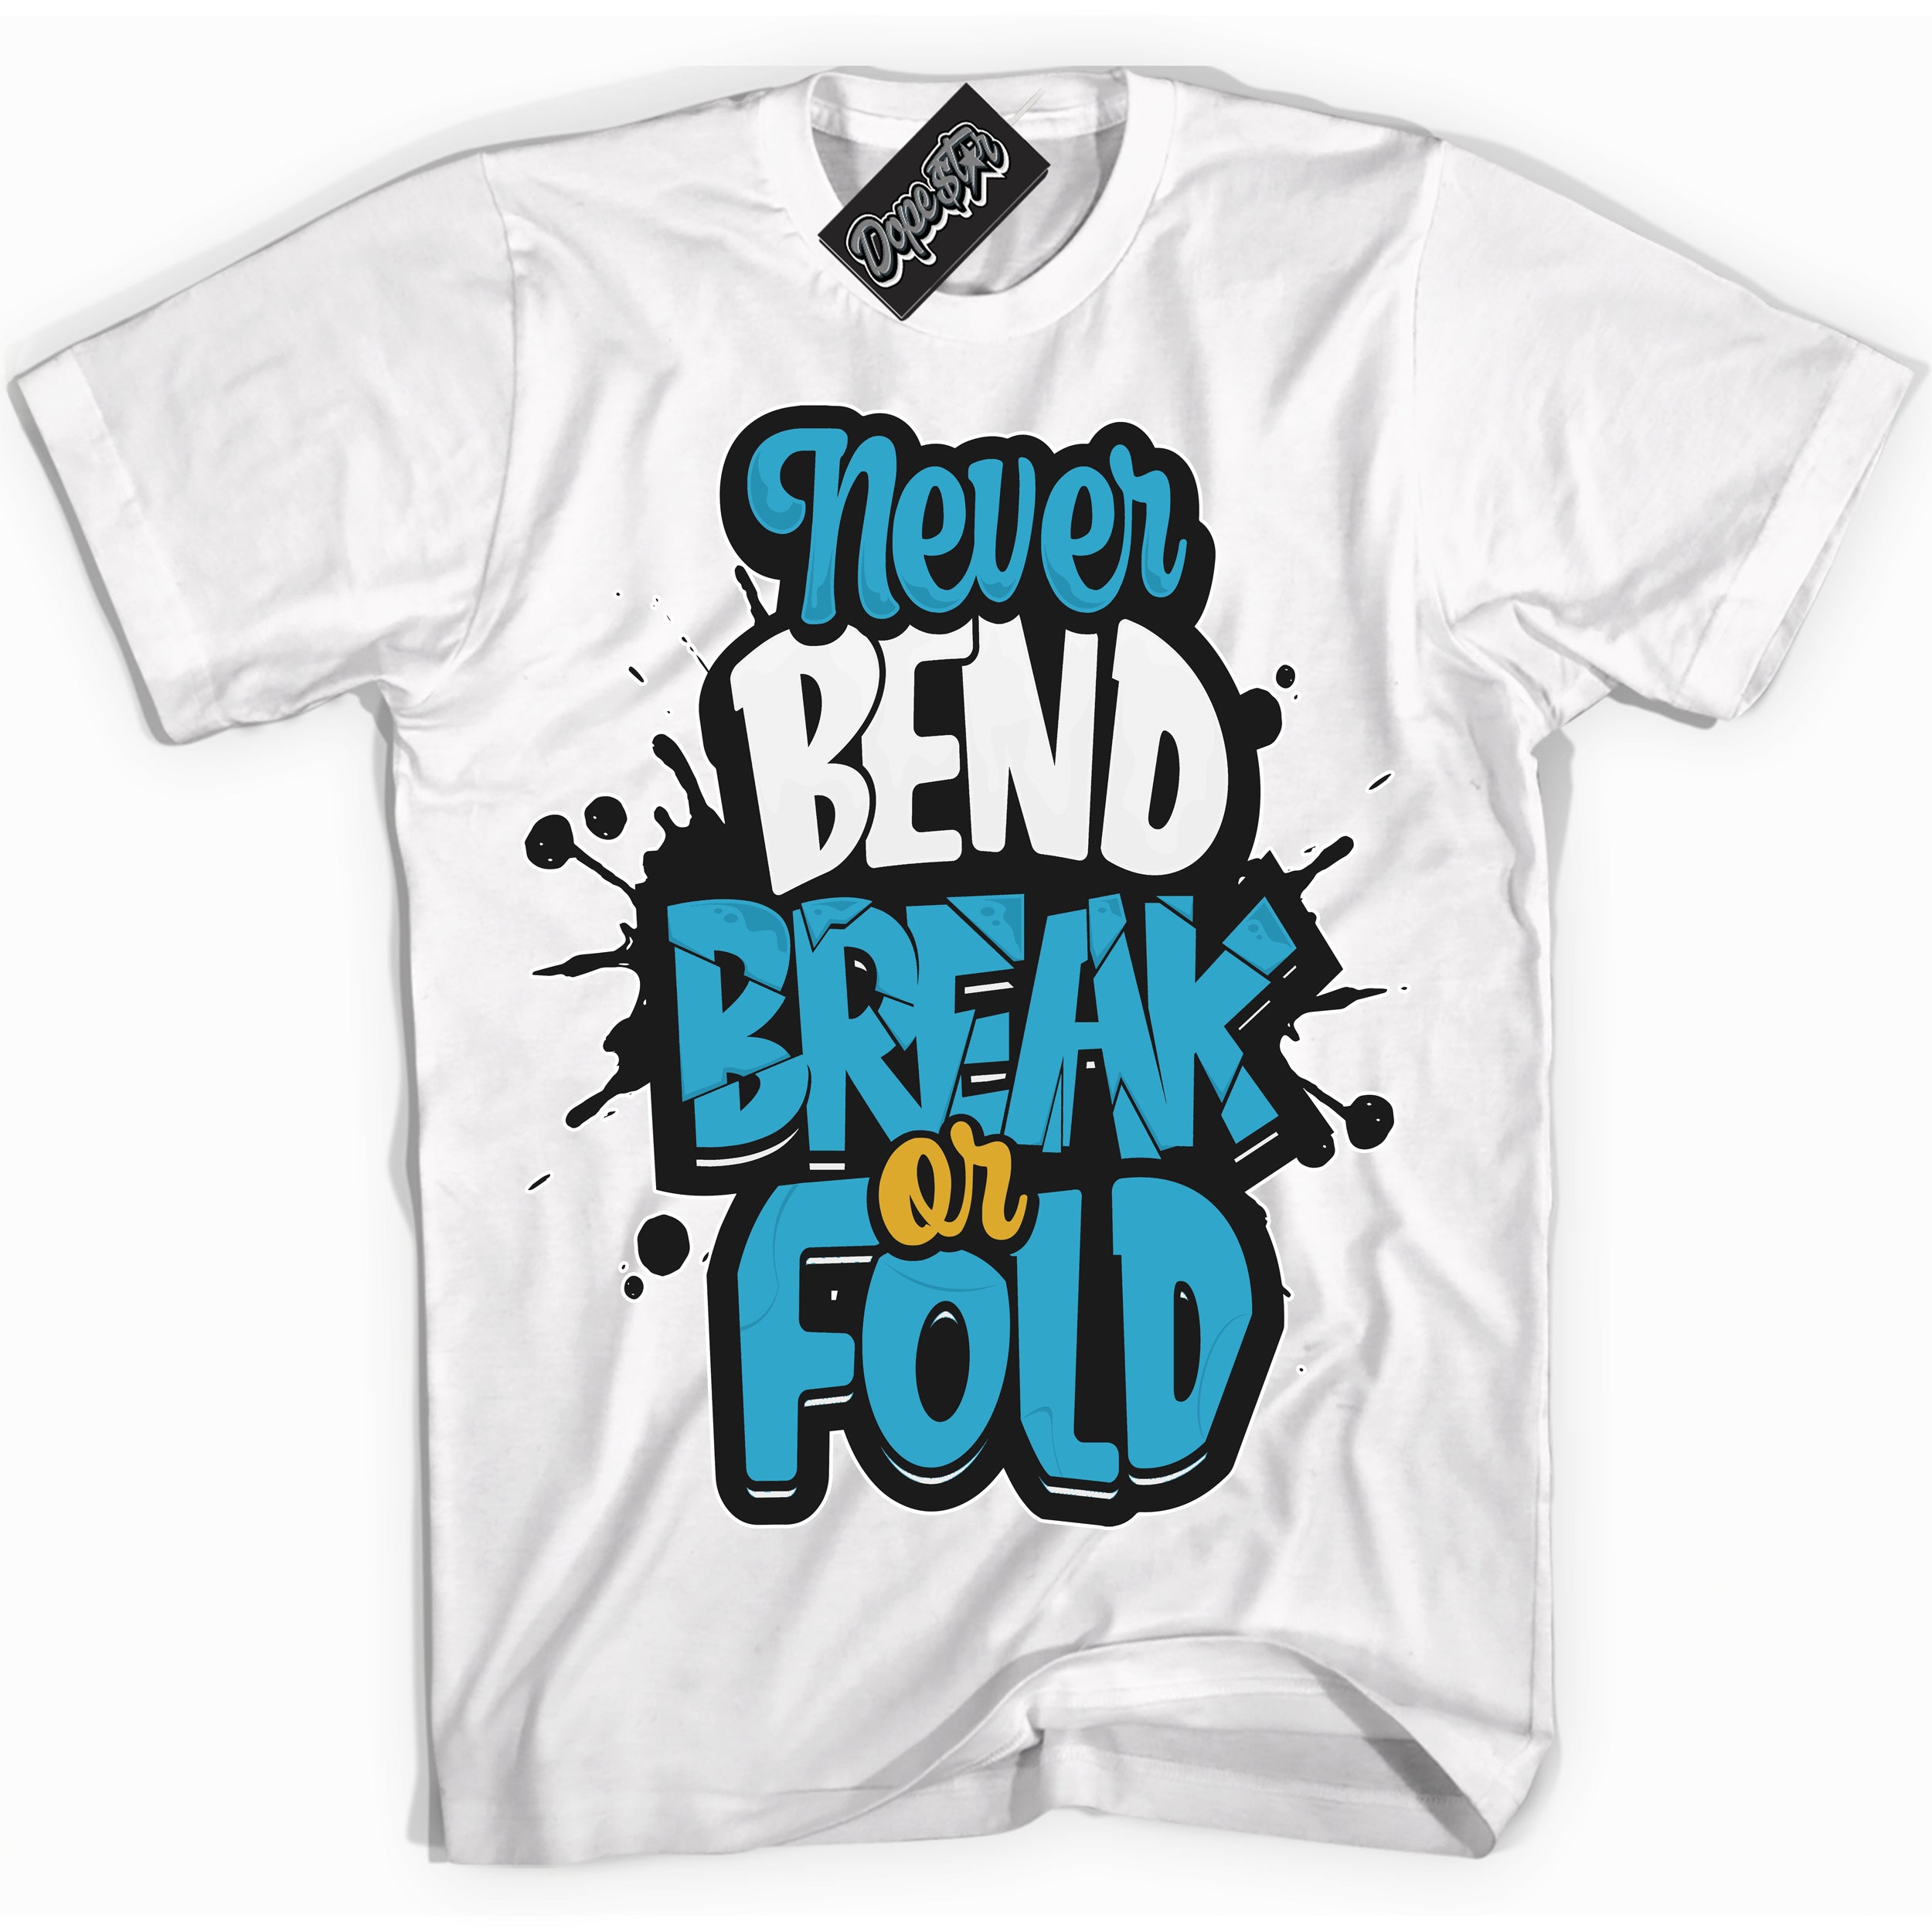 Cool White Shirt with “ Never Bend Break Or Fold” design that perfectly matches Aqua 5s Sneakers.